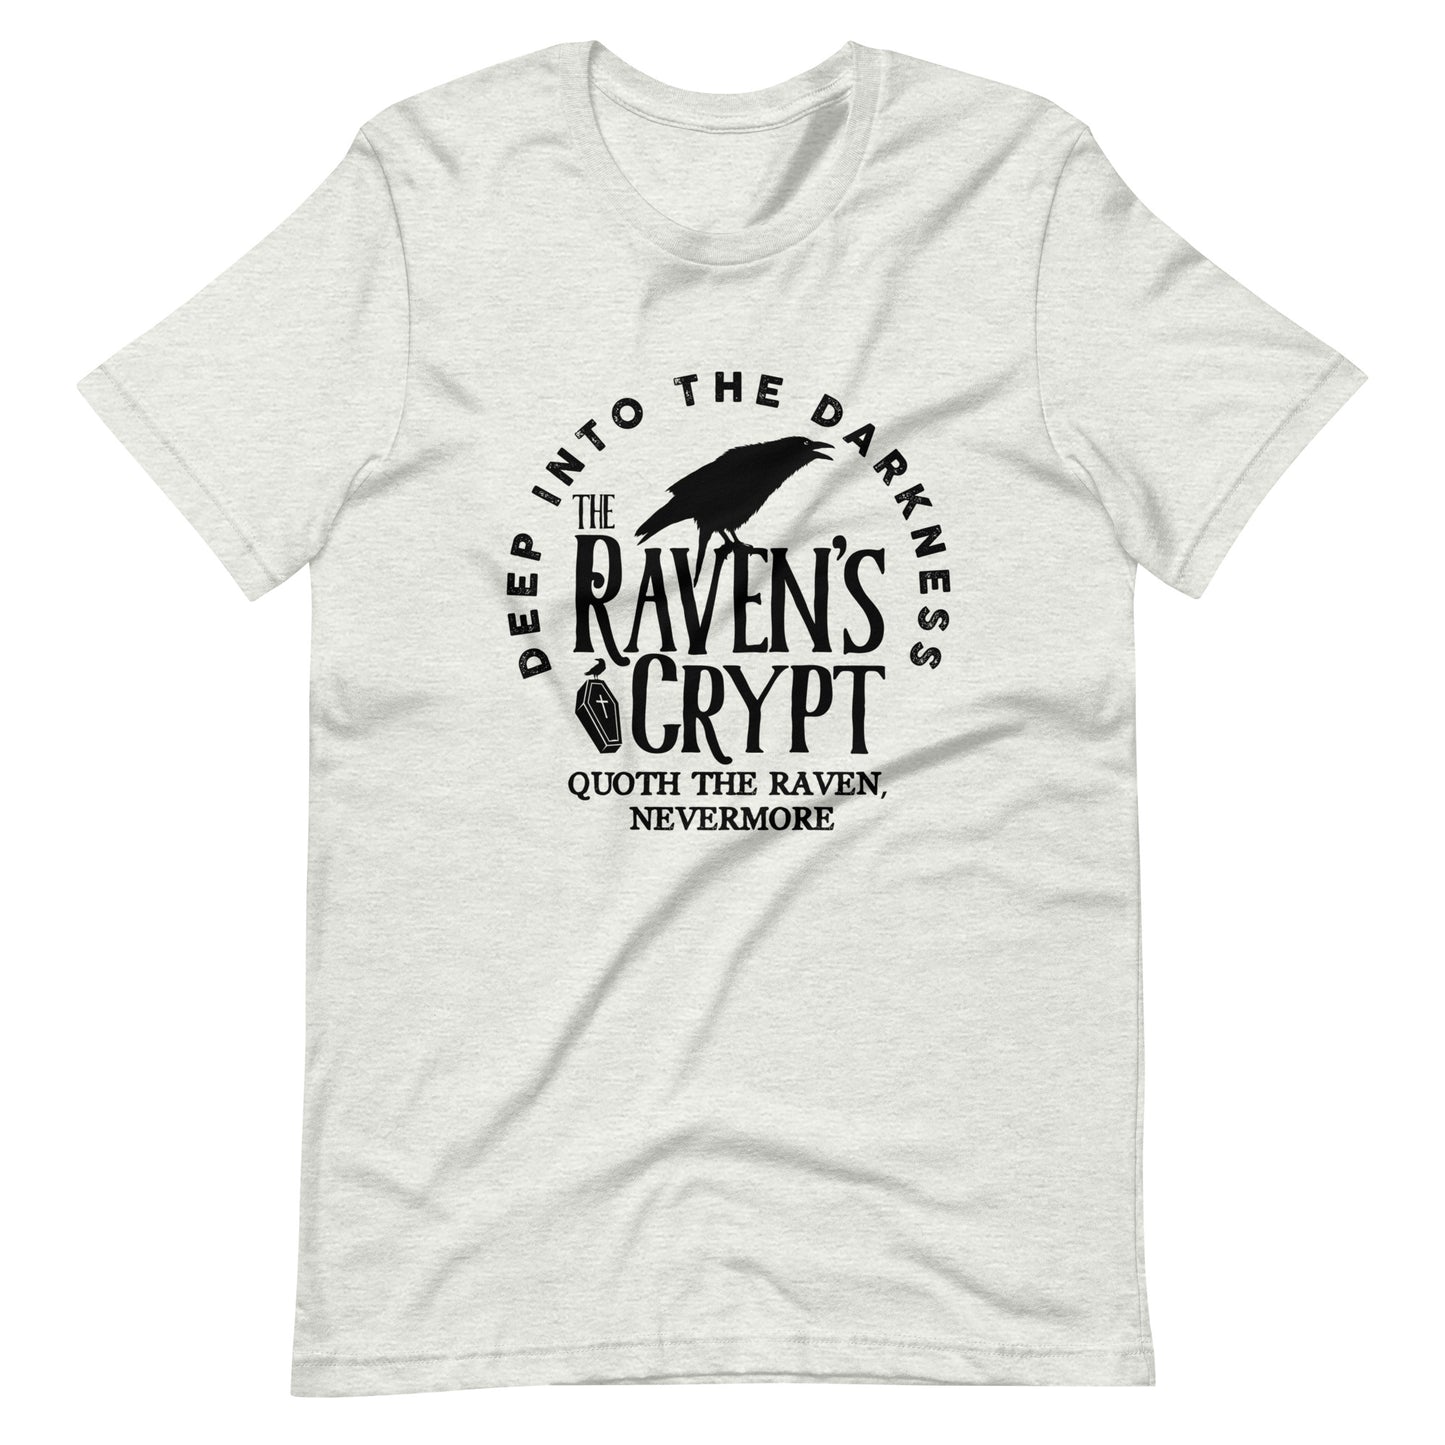 Deep Into the Darkness The Raven's Crypt - Men's t-shirt - Ash Front